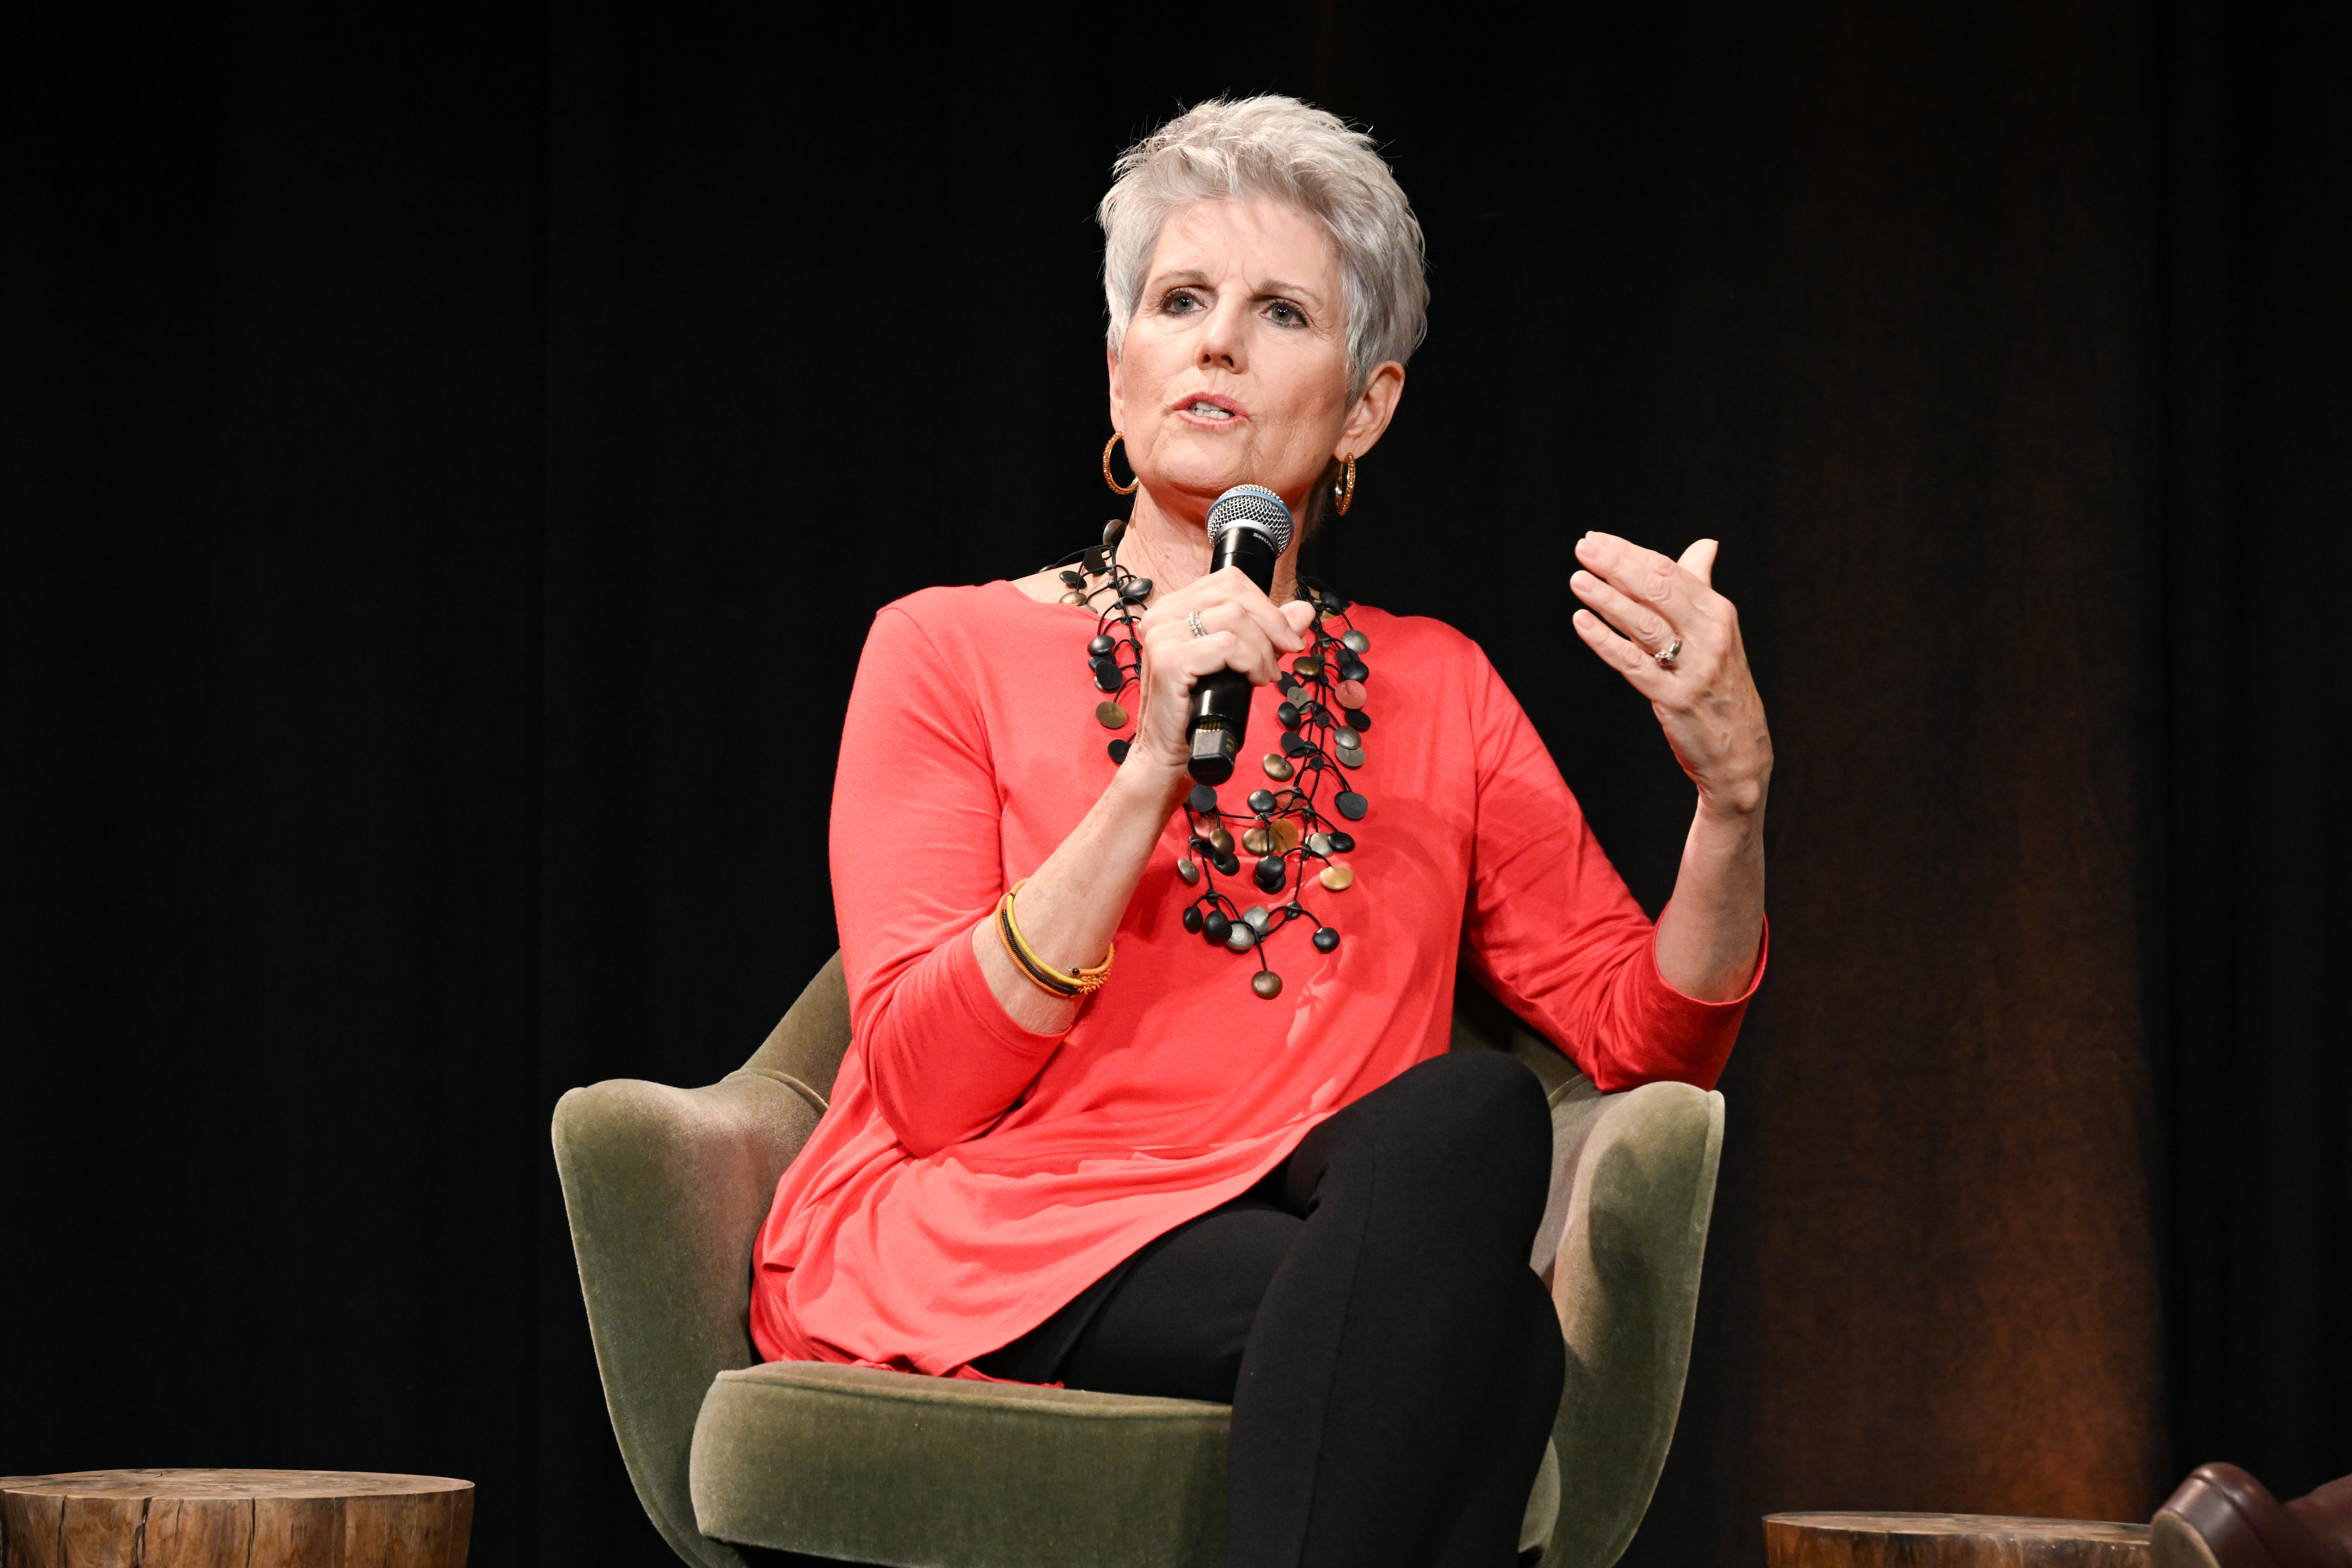 Lucie Arnaz speaks onstage during Prime Video's "Lucy And Desi" official FYC screening and panel at NeueHouse Los Angeles on May 22, 2022 in Hollywood, California | Source: Getty Images